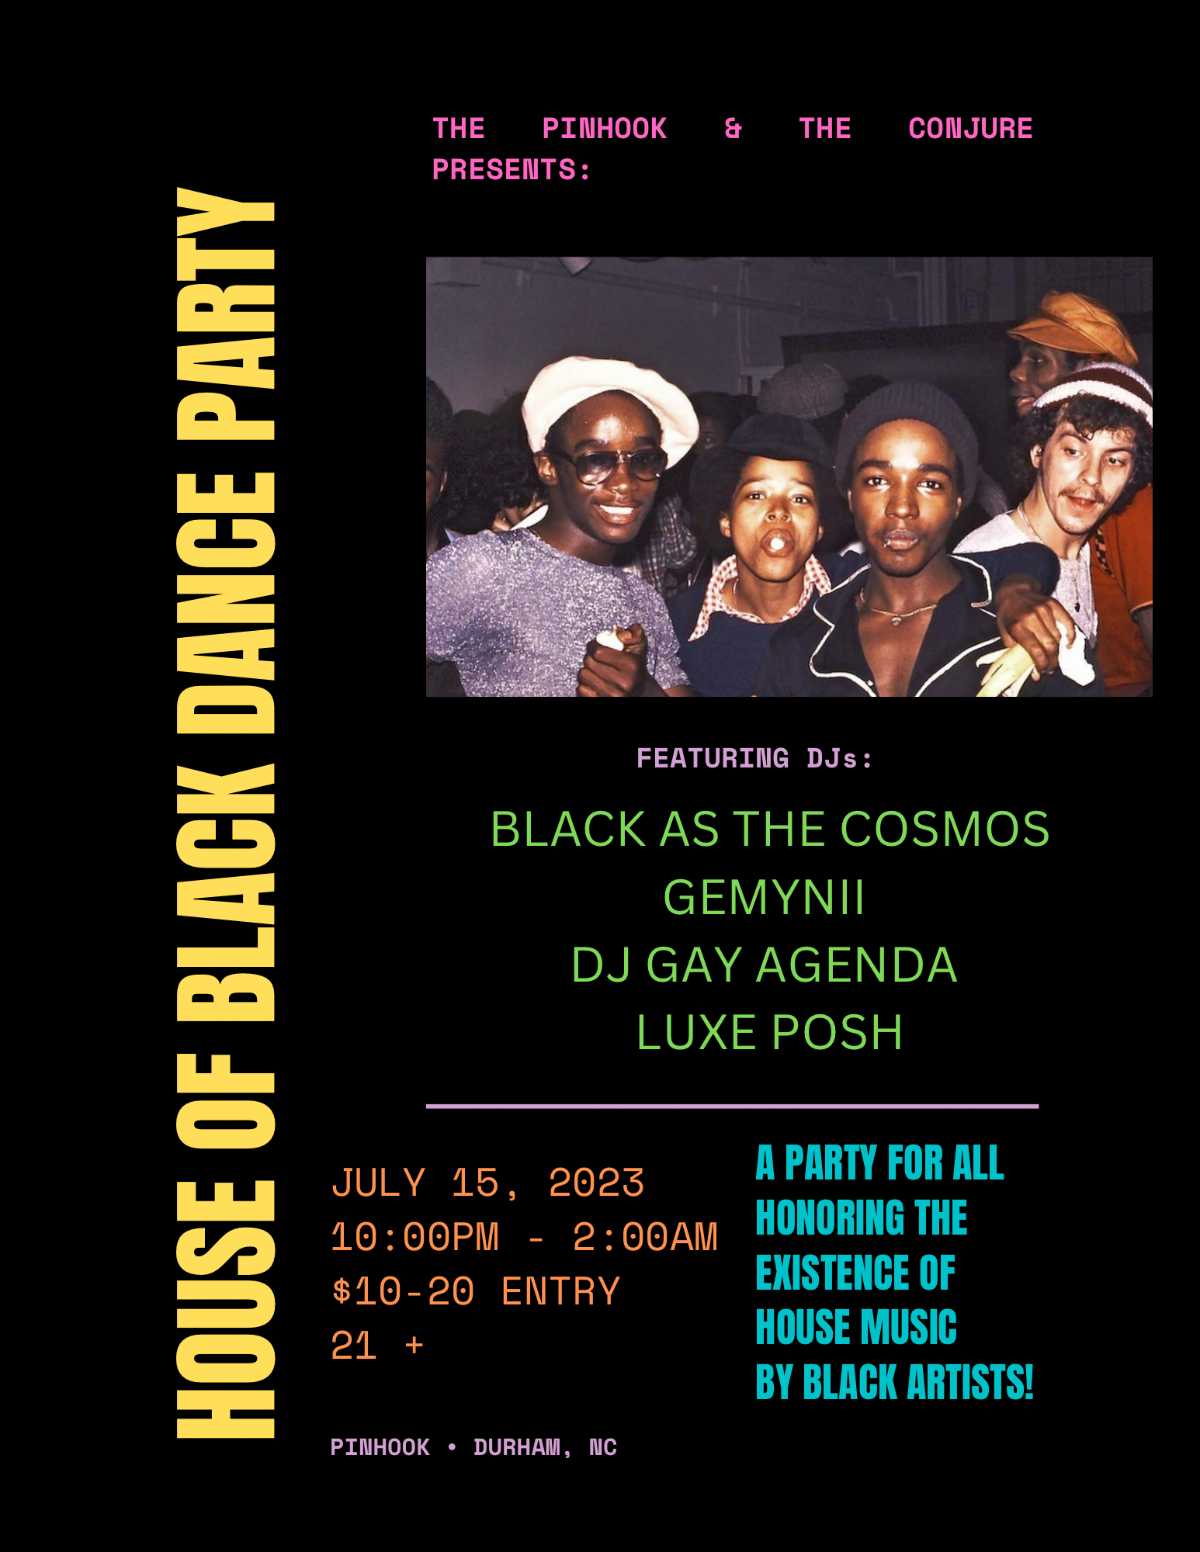 House of Black Dance Party | The Pinhook